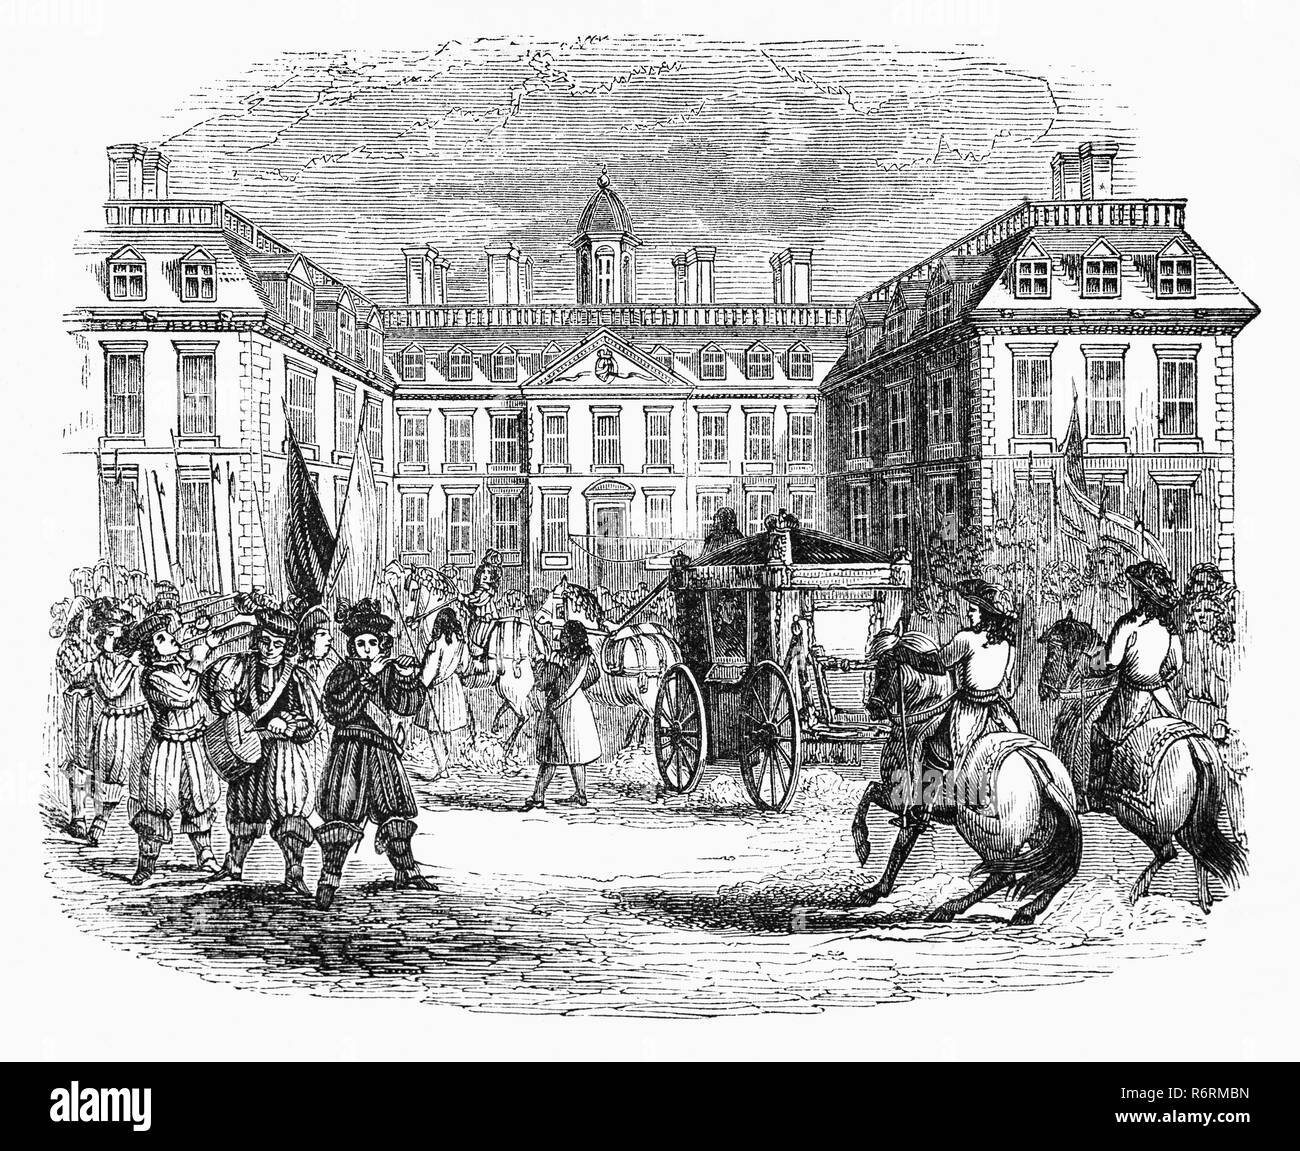 The arrival of King Charles II to Clarendon House, a town mansion standing in Piccadilly in London, England, from the 1660s to the 1680s. It was built for the powerful politician Edward Hyde, 1st Earl of Clarendon after the restoration of the English monarchy in 1660. In 1667,  Clarendon fell from favour after the charge that he has appropriated stone intended for repairs to St. Paul's Cathedral after the Great Fire to build his house. The King later abandoned his former favourite, who fled to France. Stock Photo